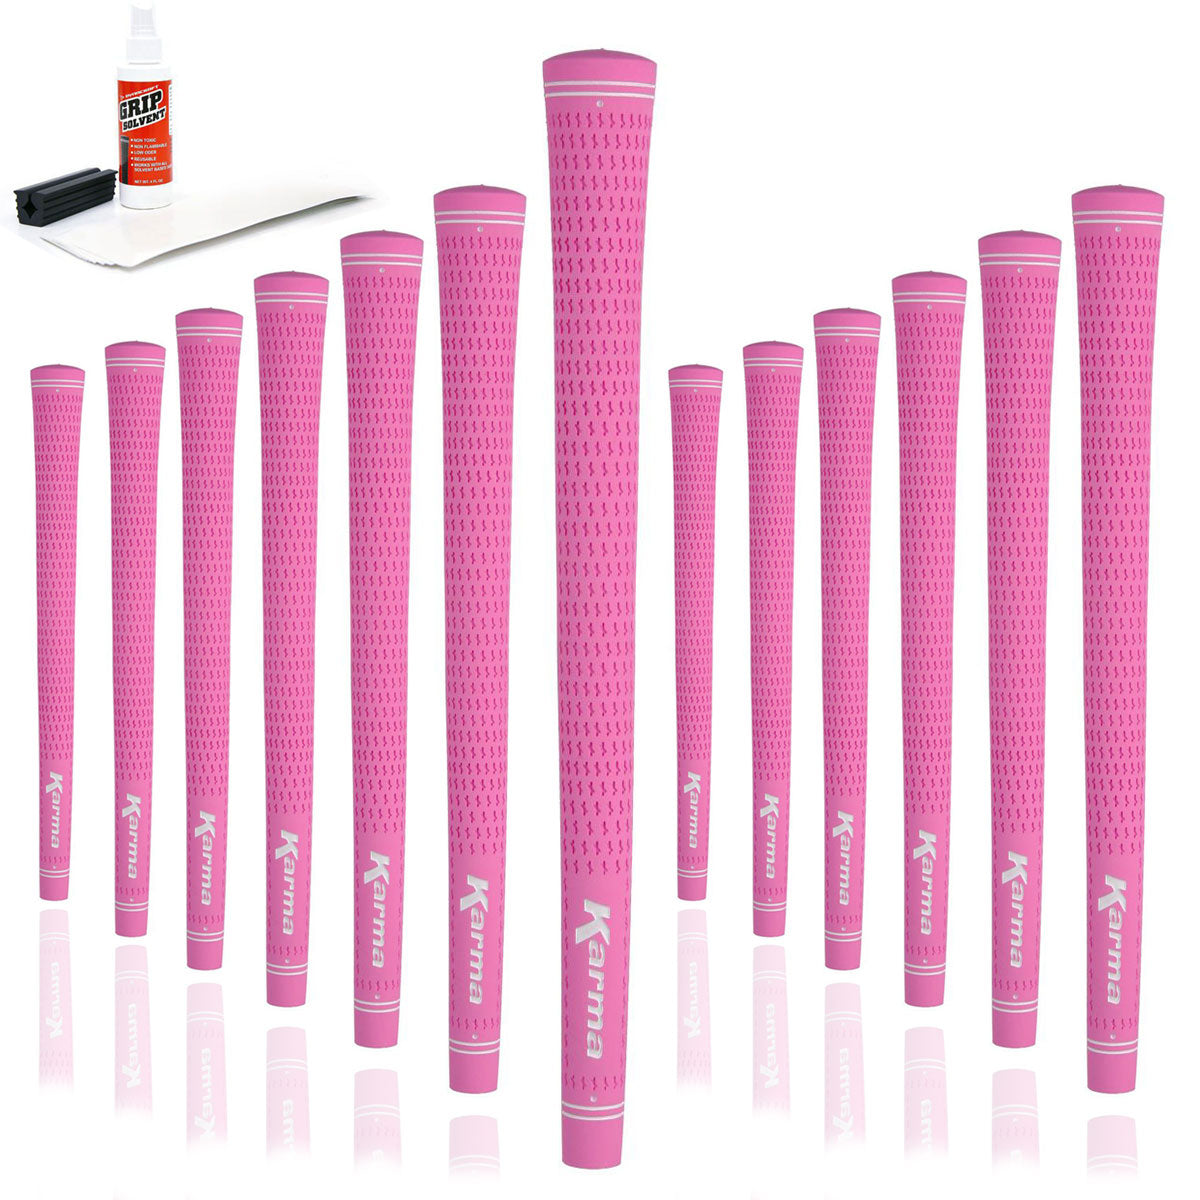 13 Karma Velour Pink golf grips, golf grip tape strips, bottle of grip solvent and rubber shaft clamp